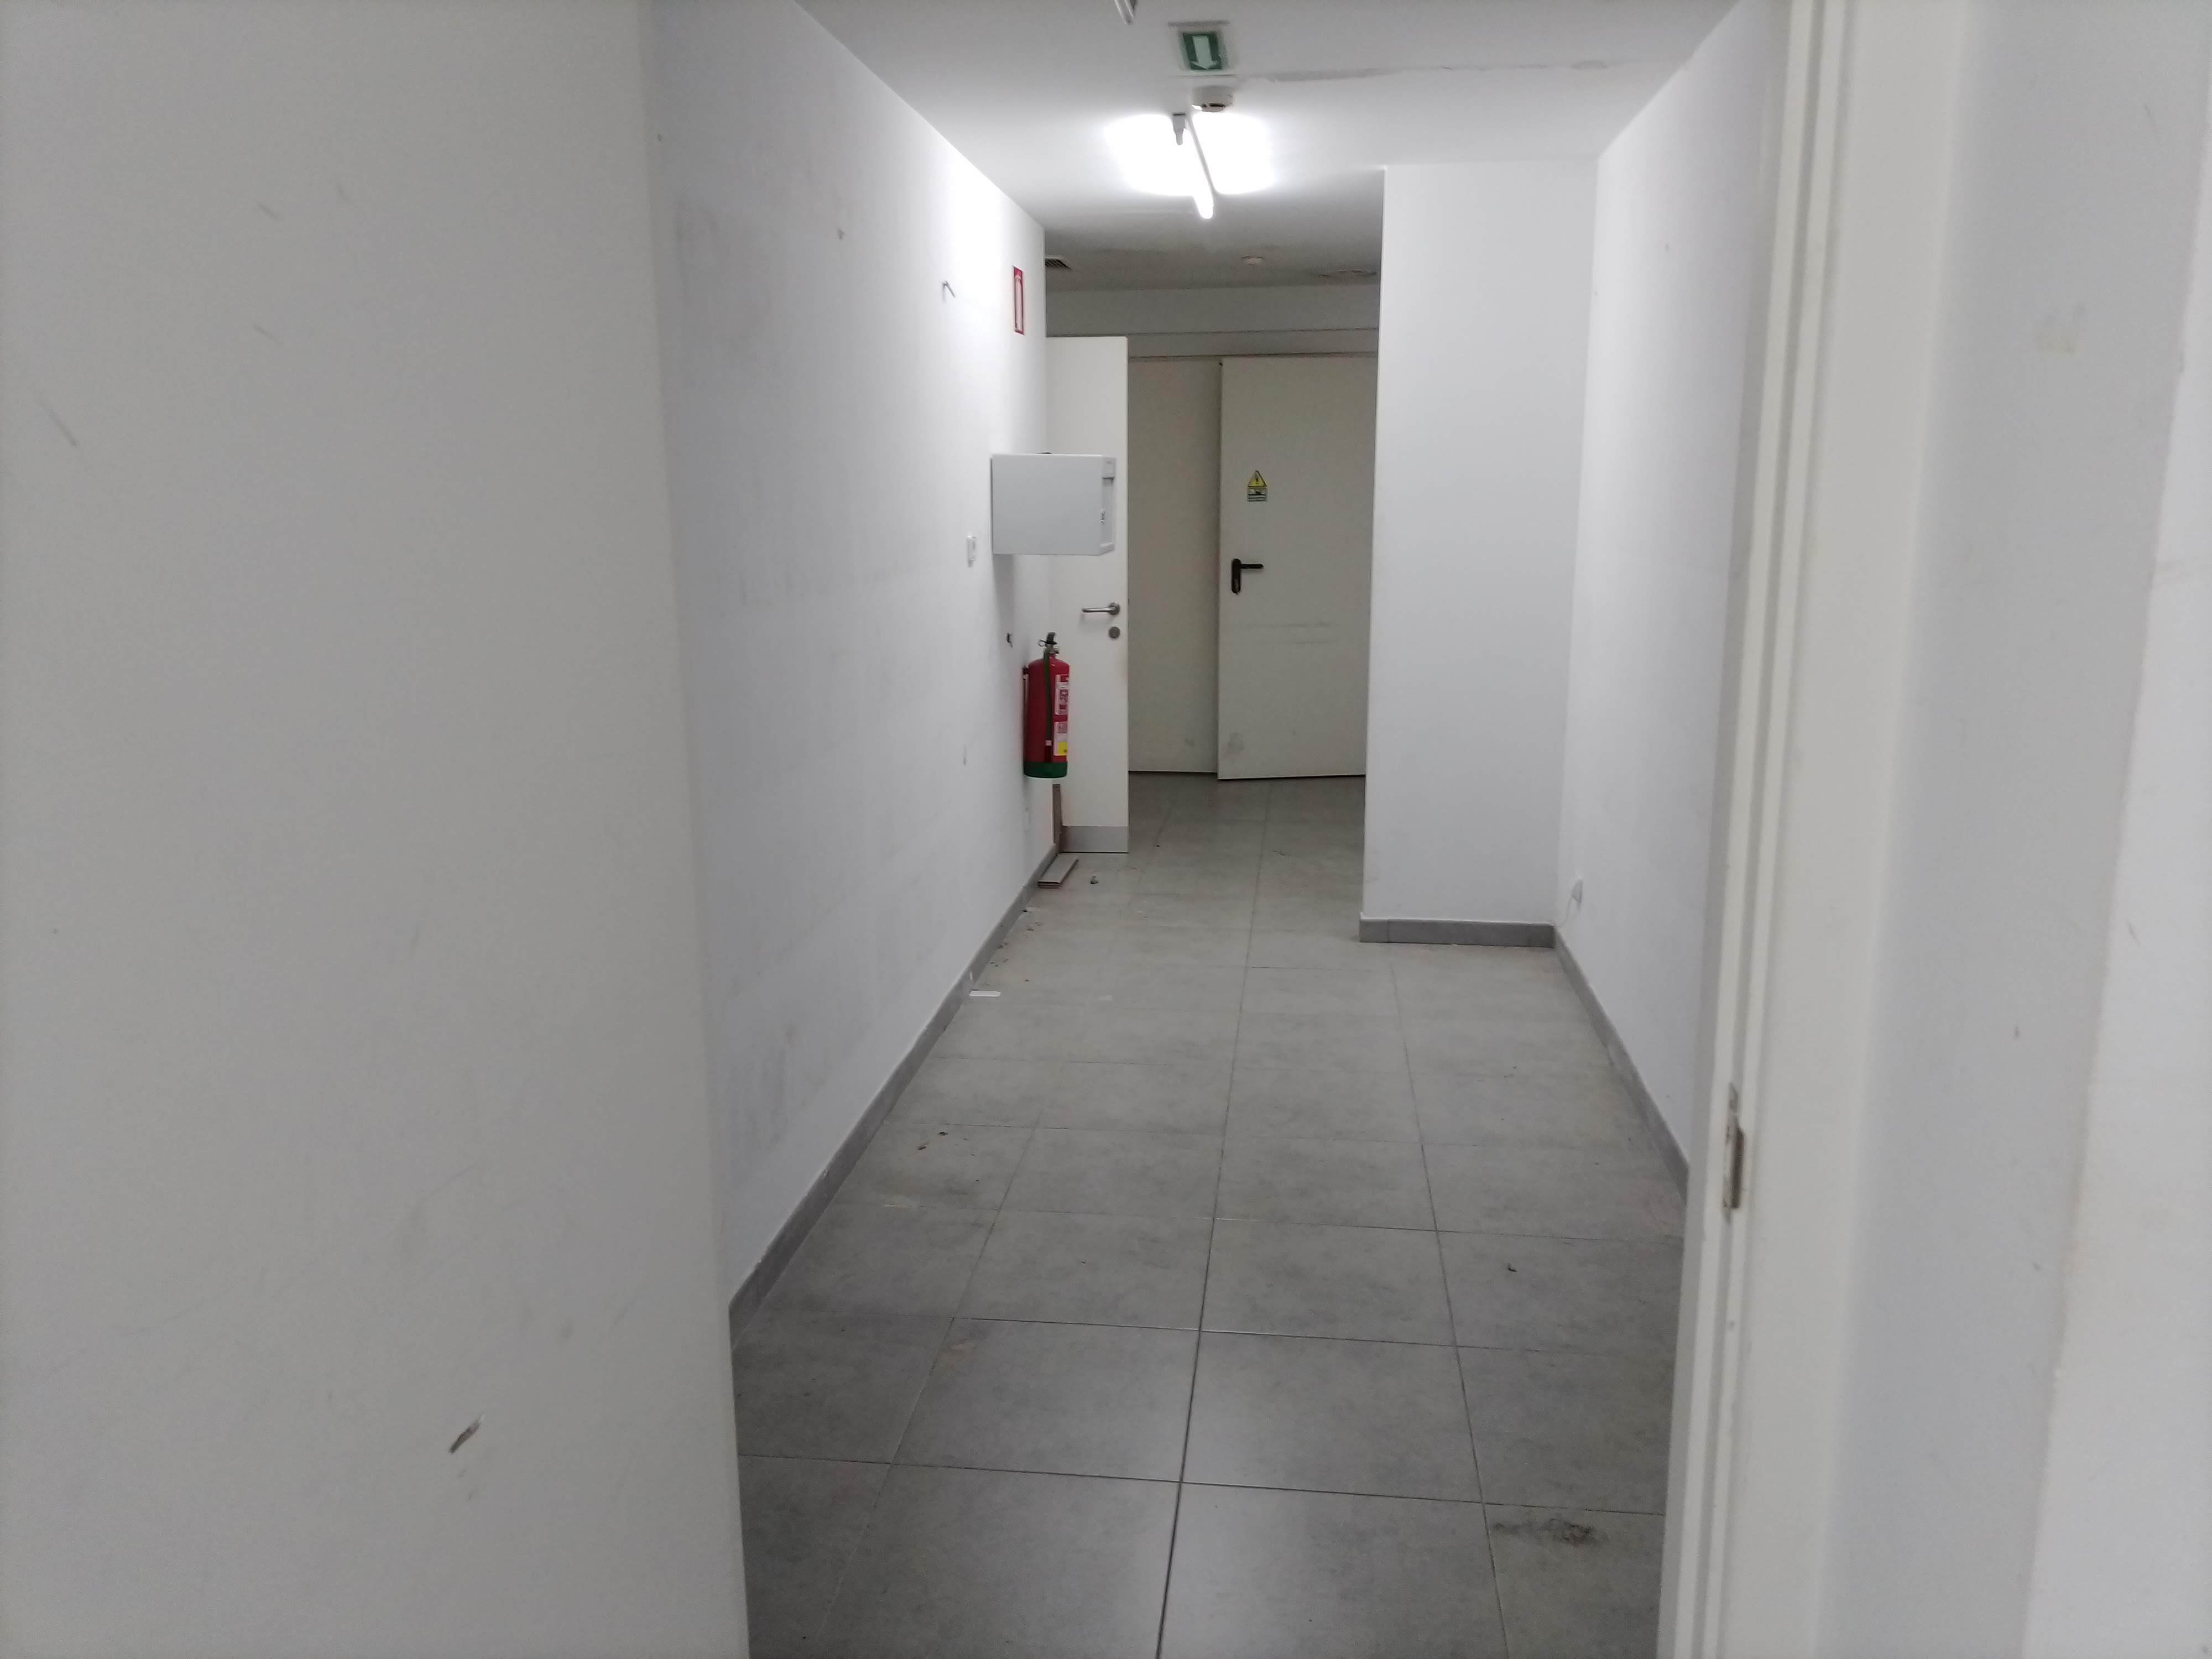 Local for rent in the city center